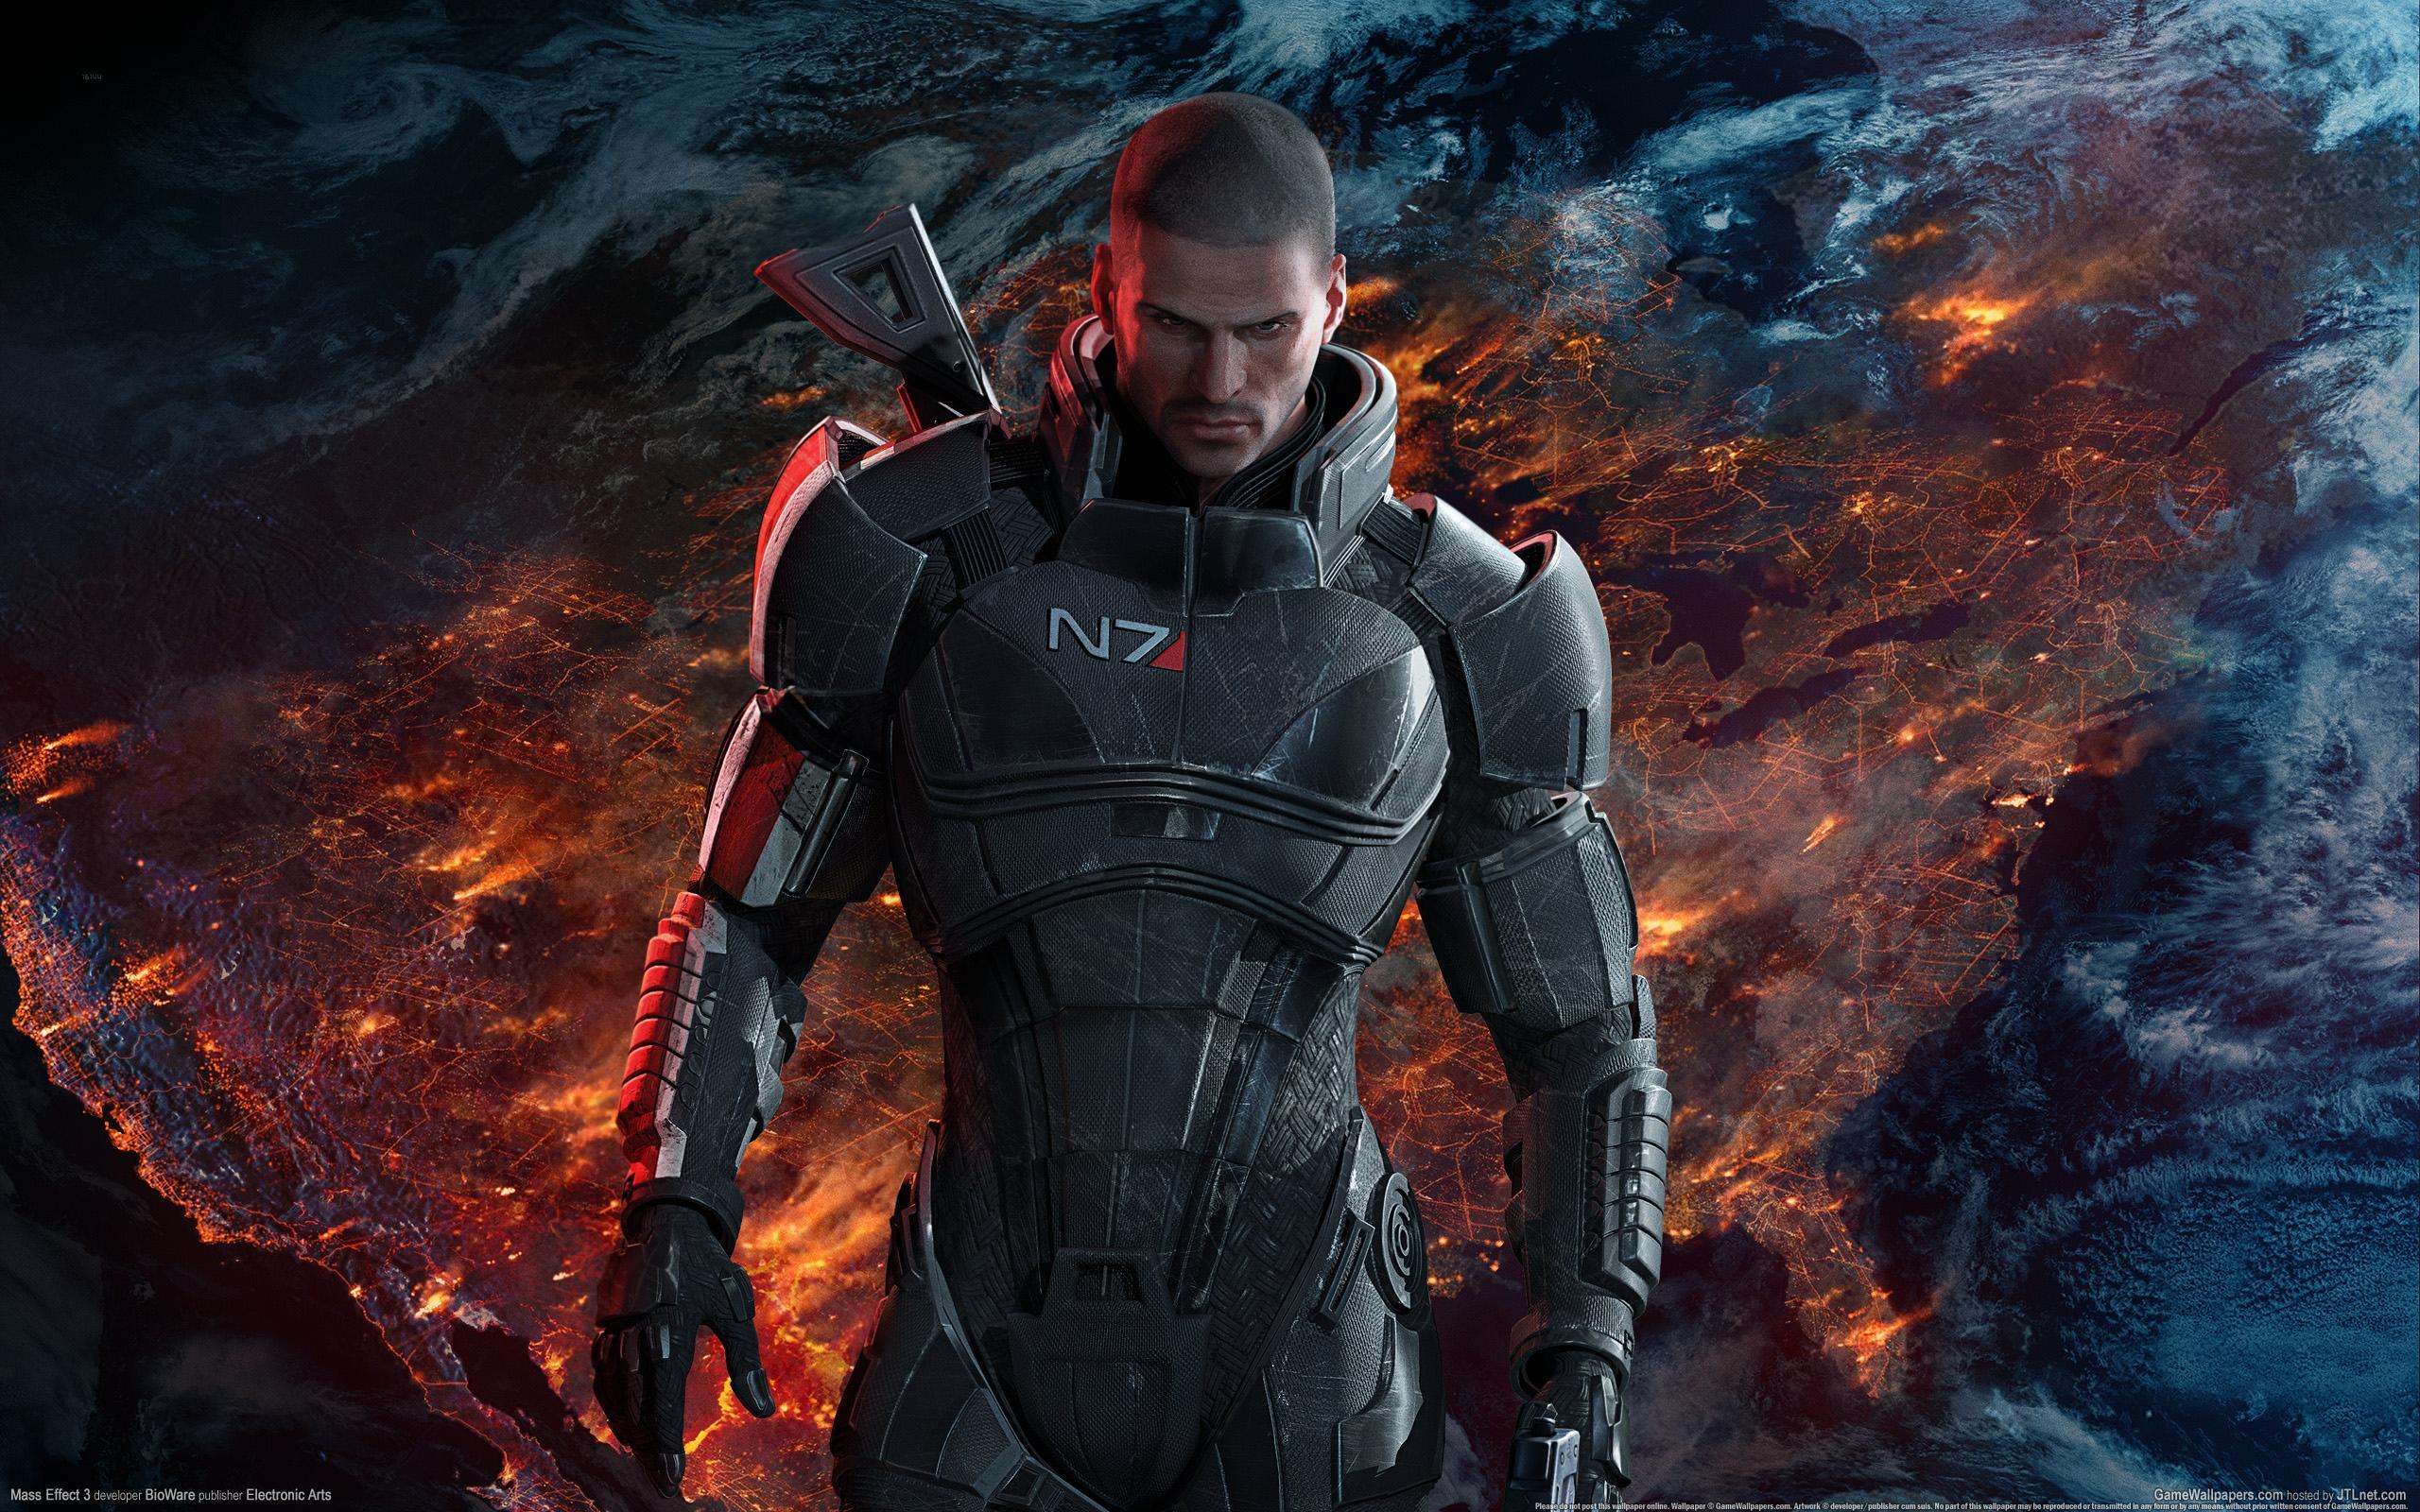 Commander Shepard from Mass Effect 3, a video game character